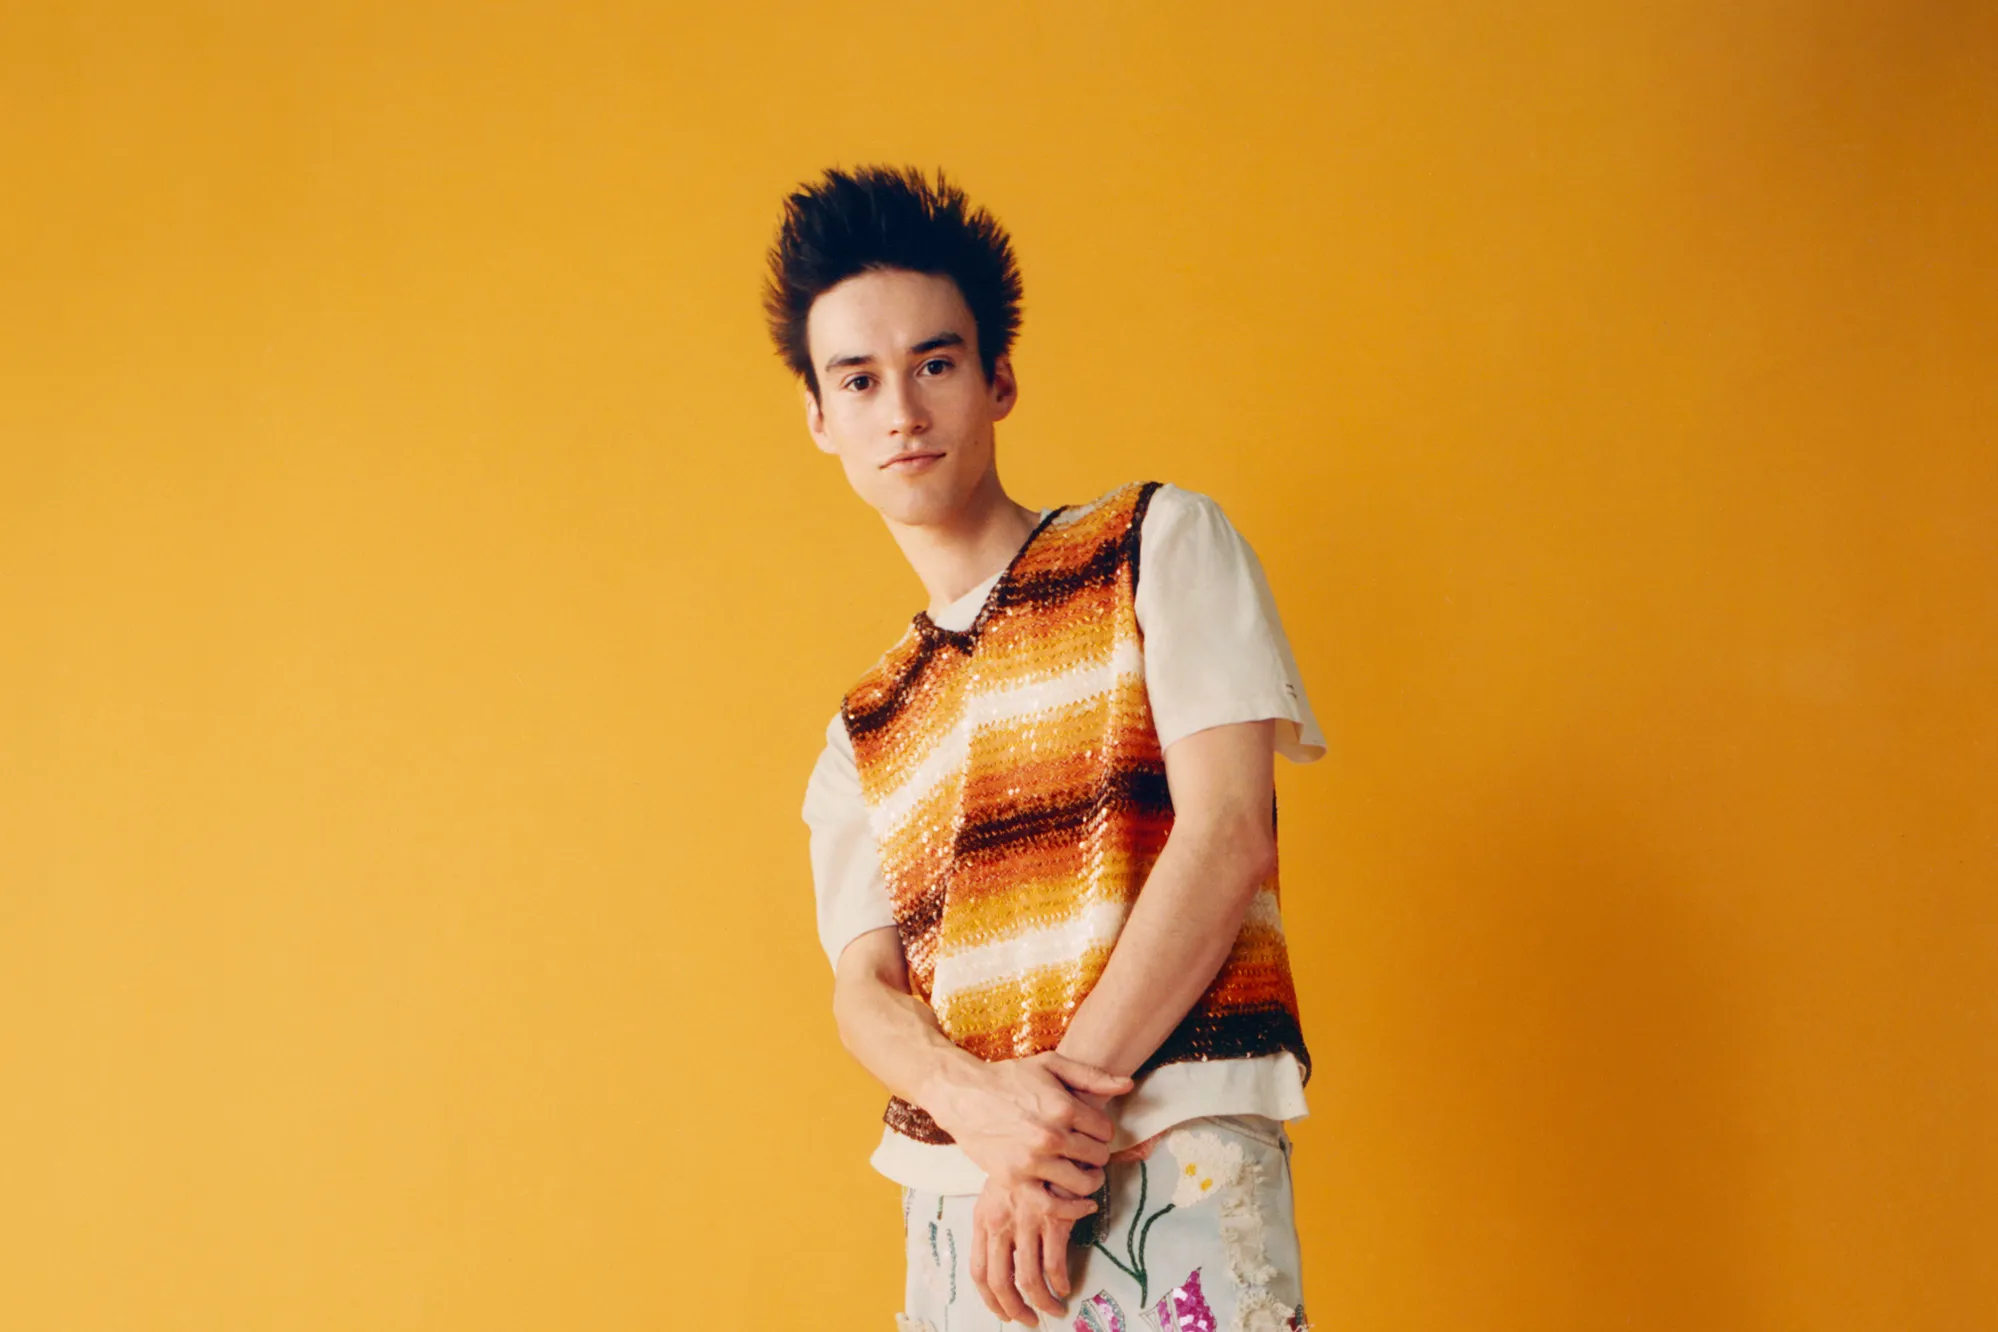 Jacob Collier singer of The Sun Is In Your Eyes